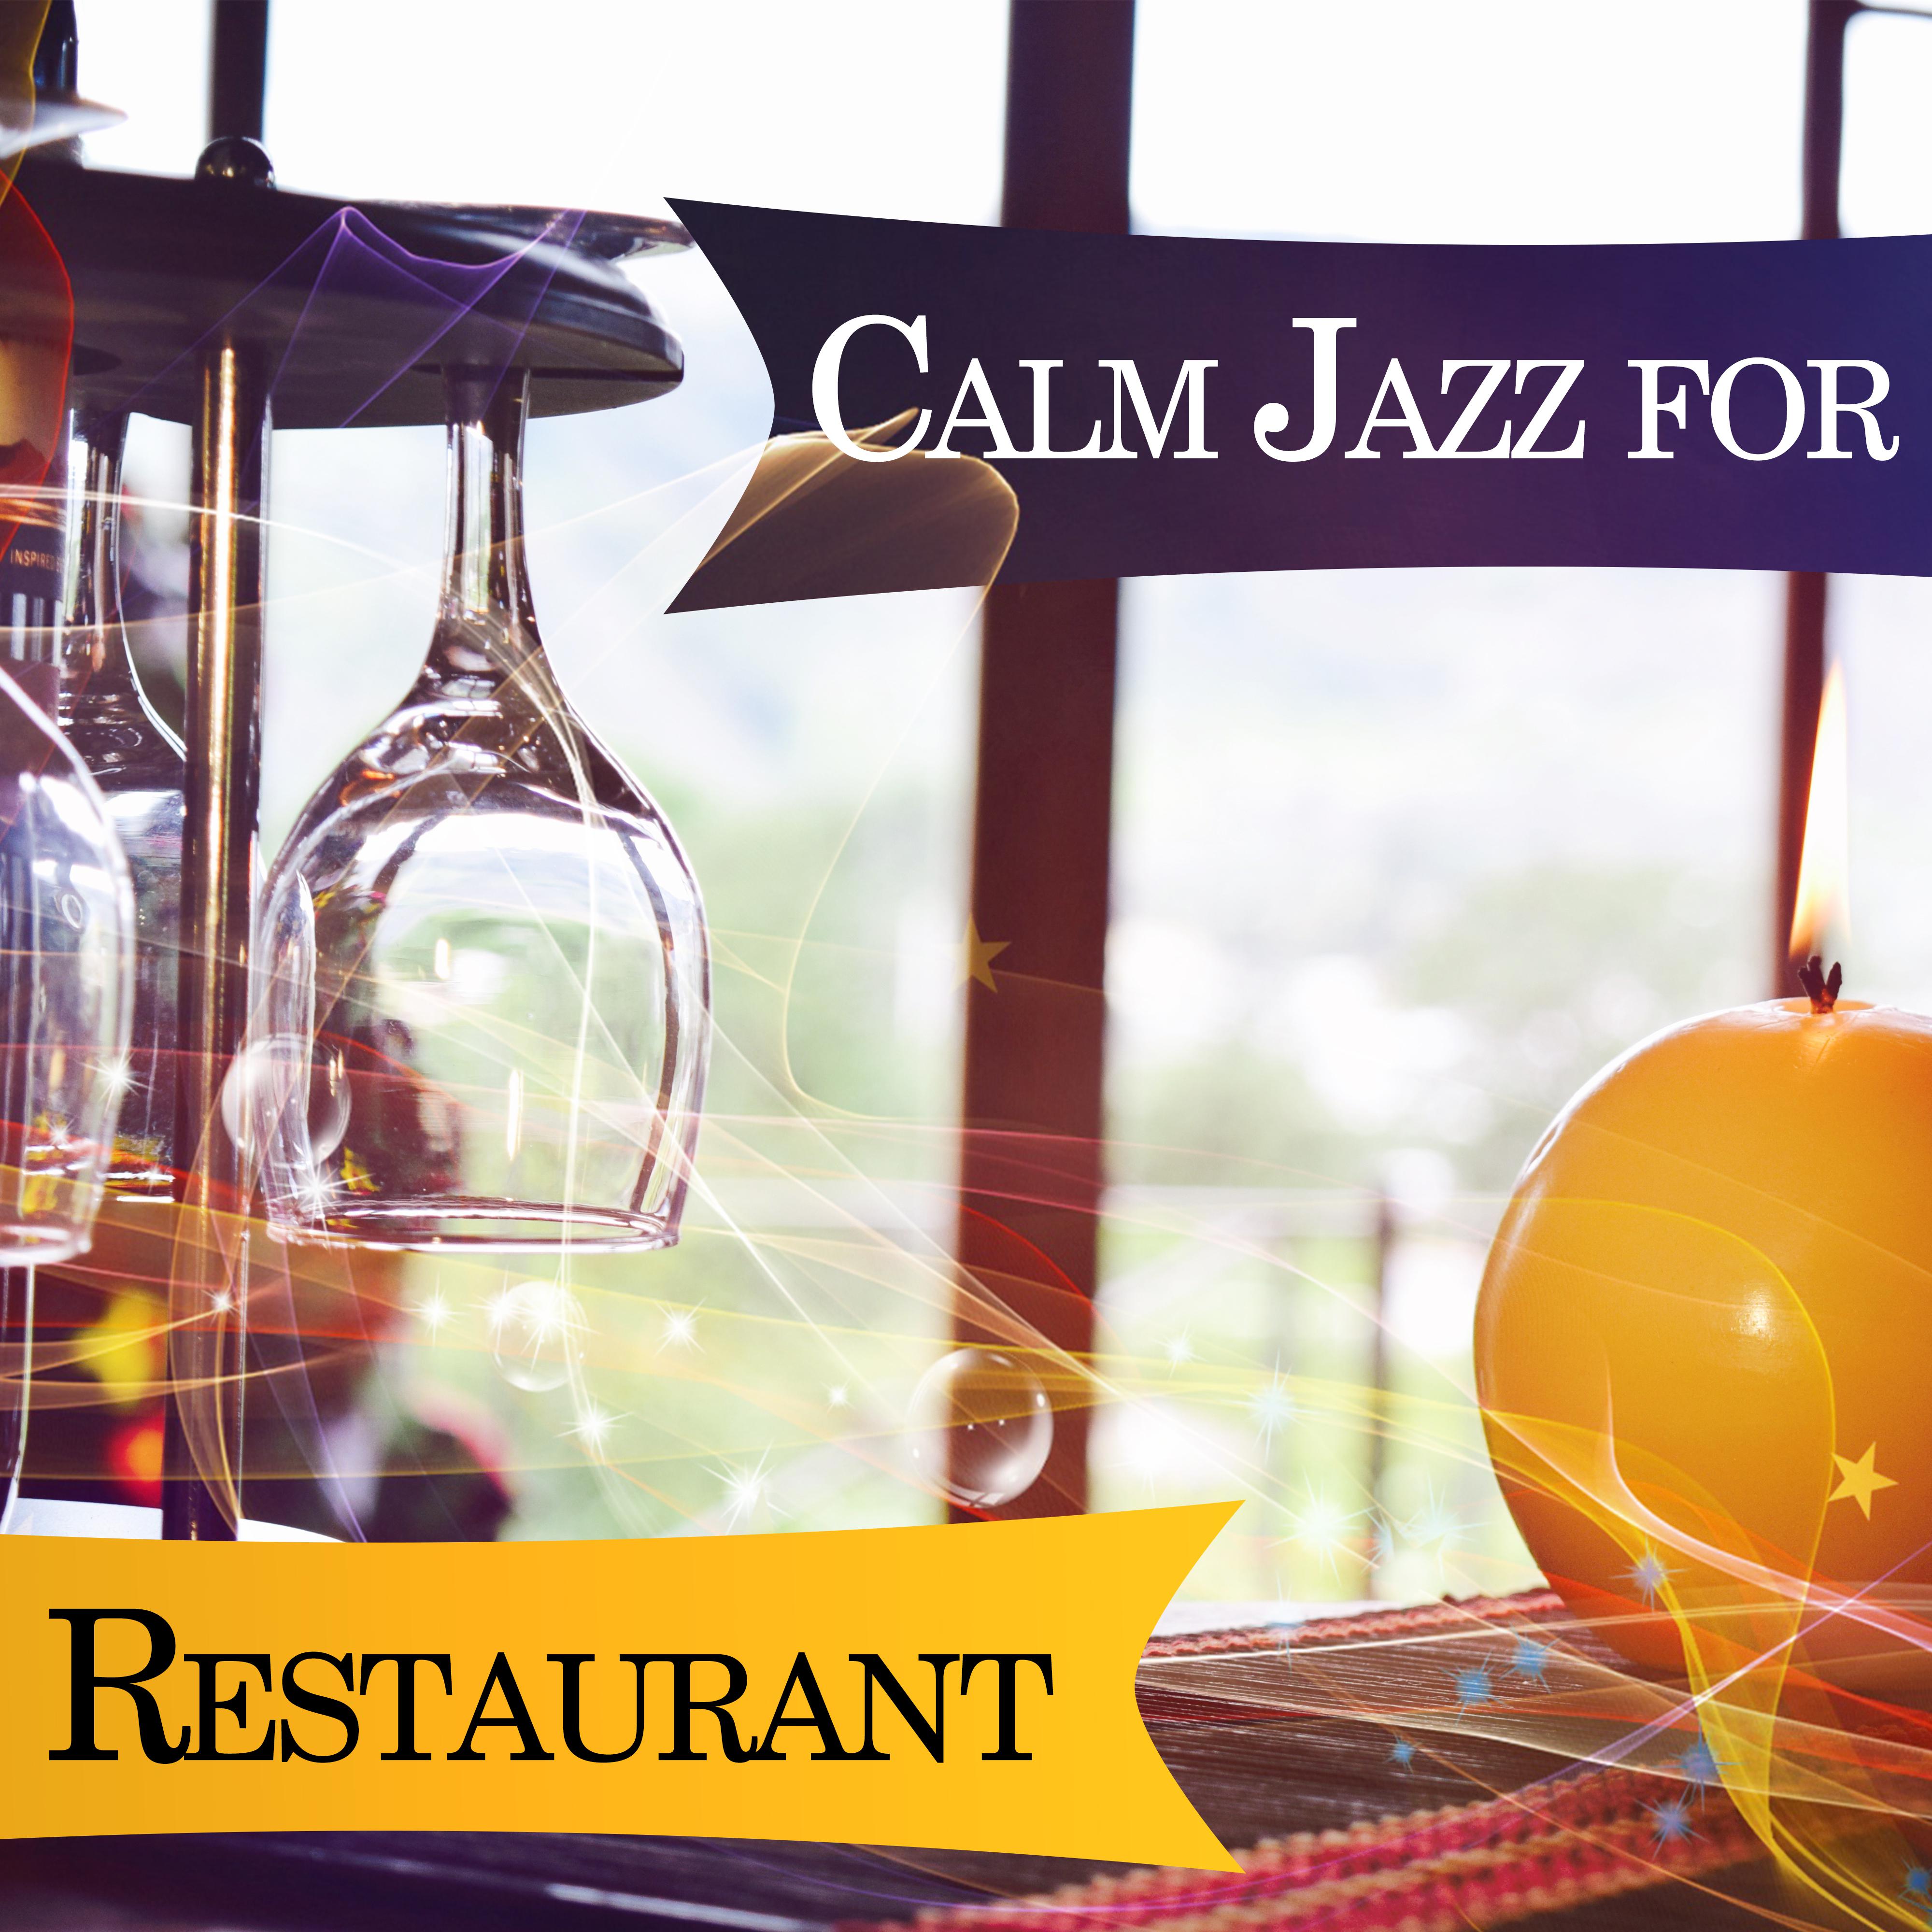 Calm Jazz for Restaurant  Smooth Jazz Music, Relaxing Sounds, Dinner Time, Cafe Bar